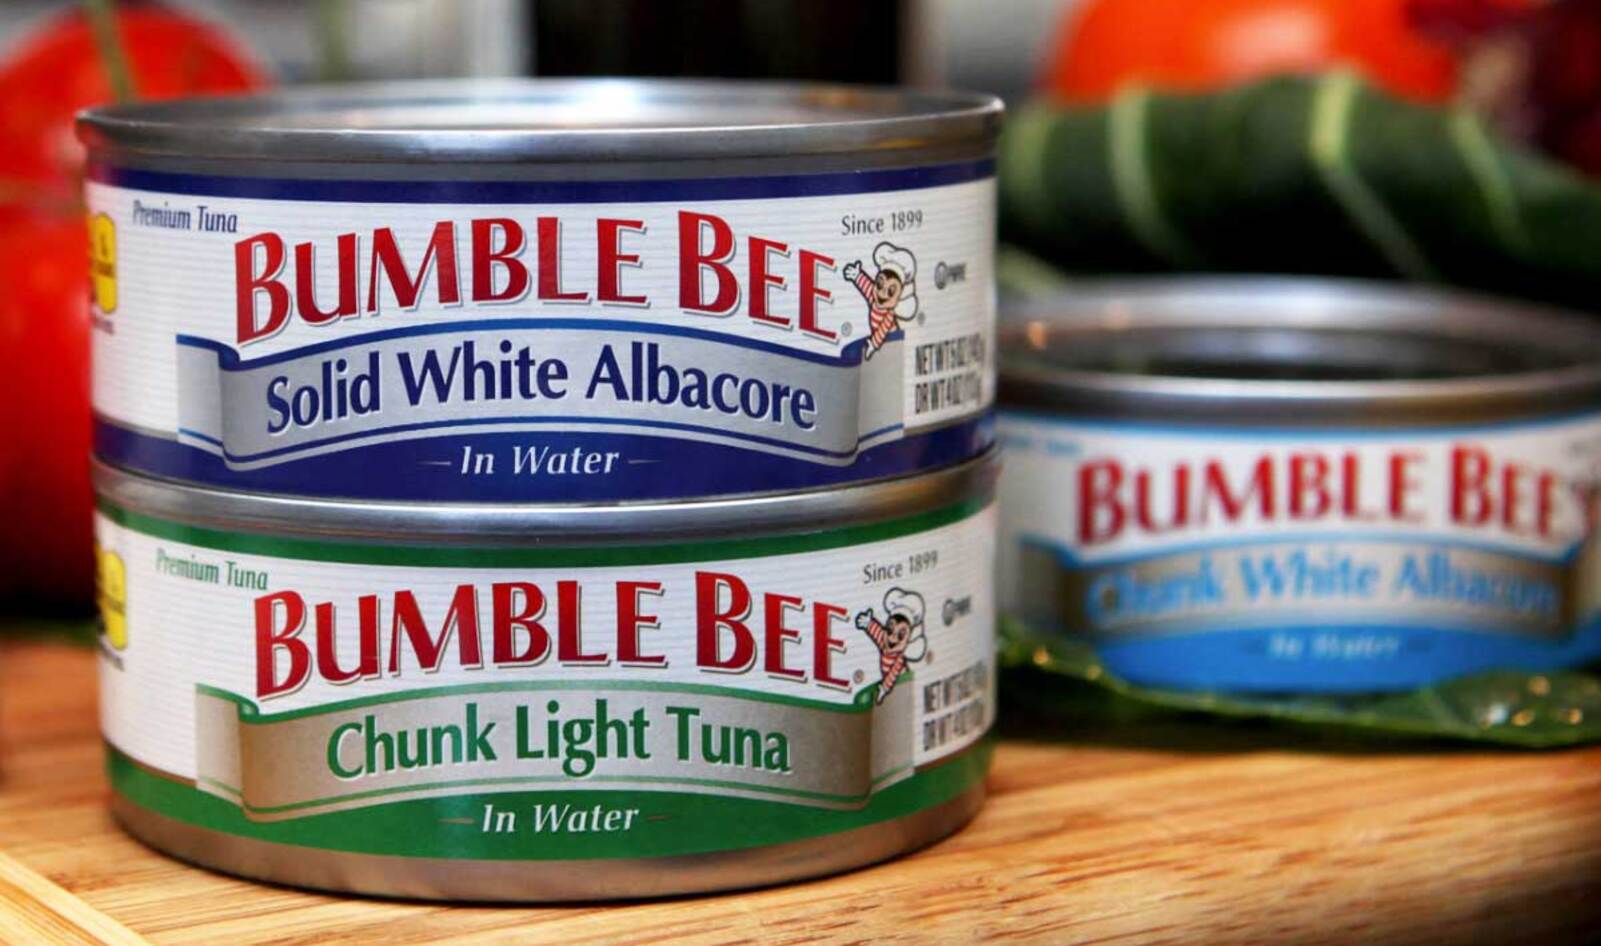 Bumble Bee’s New Venture Is About to Make Vegan Seafood Widely Available